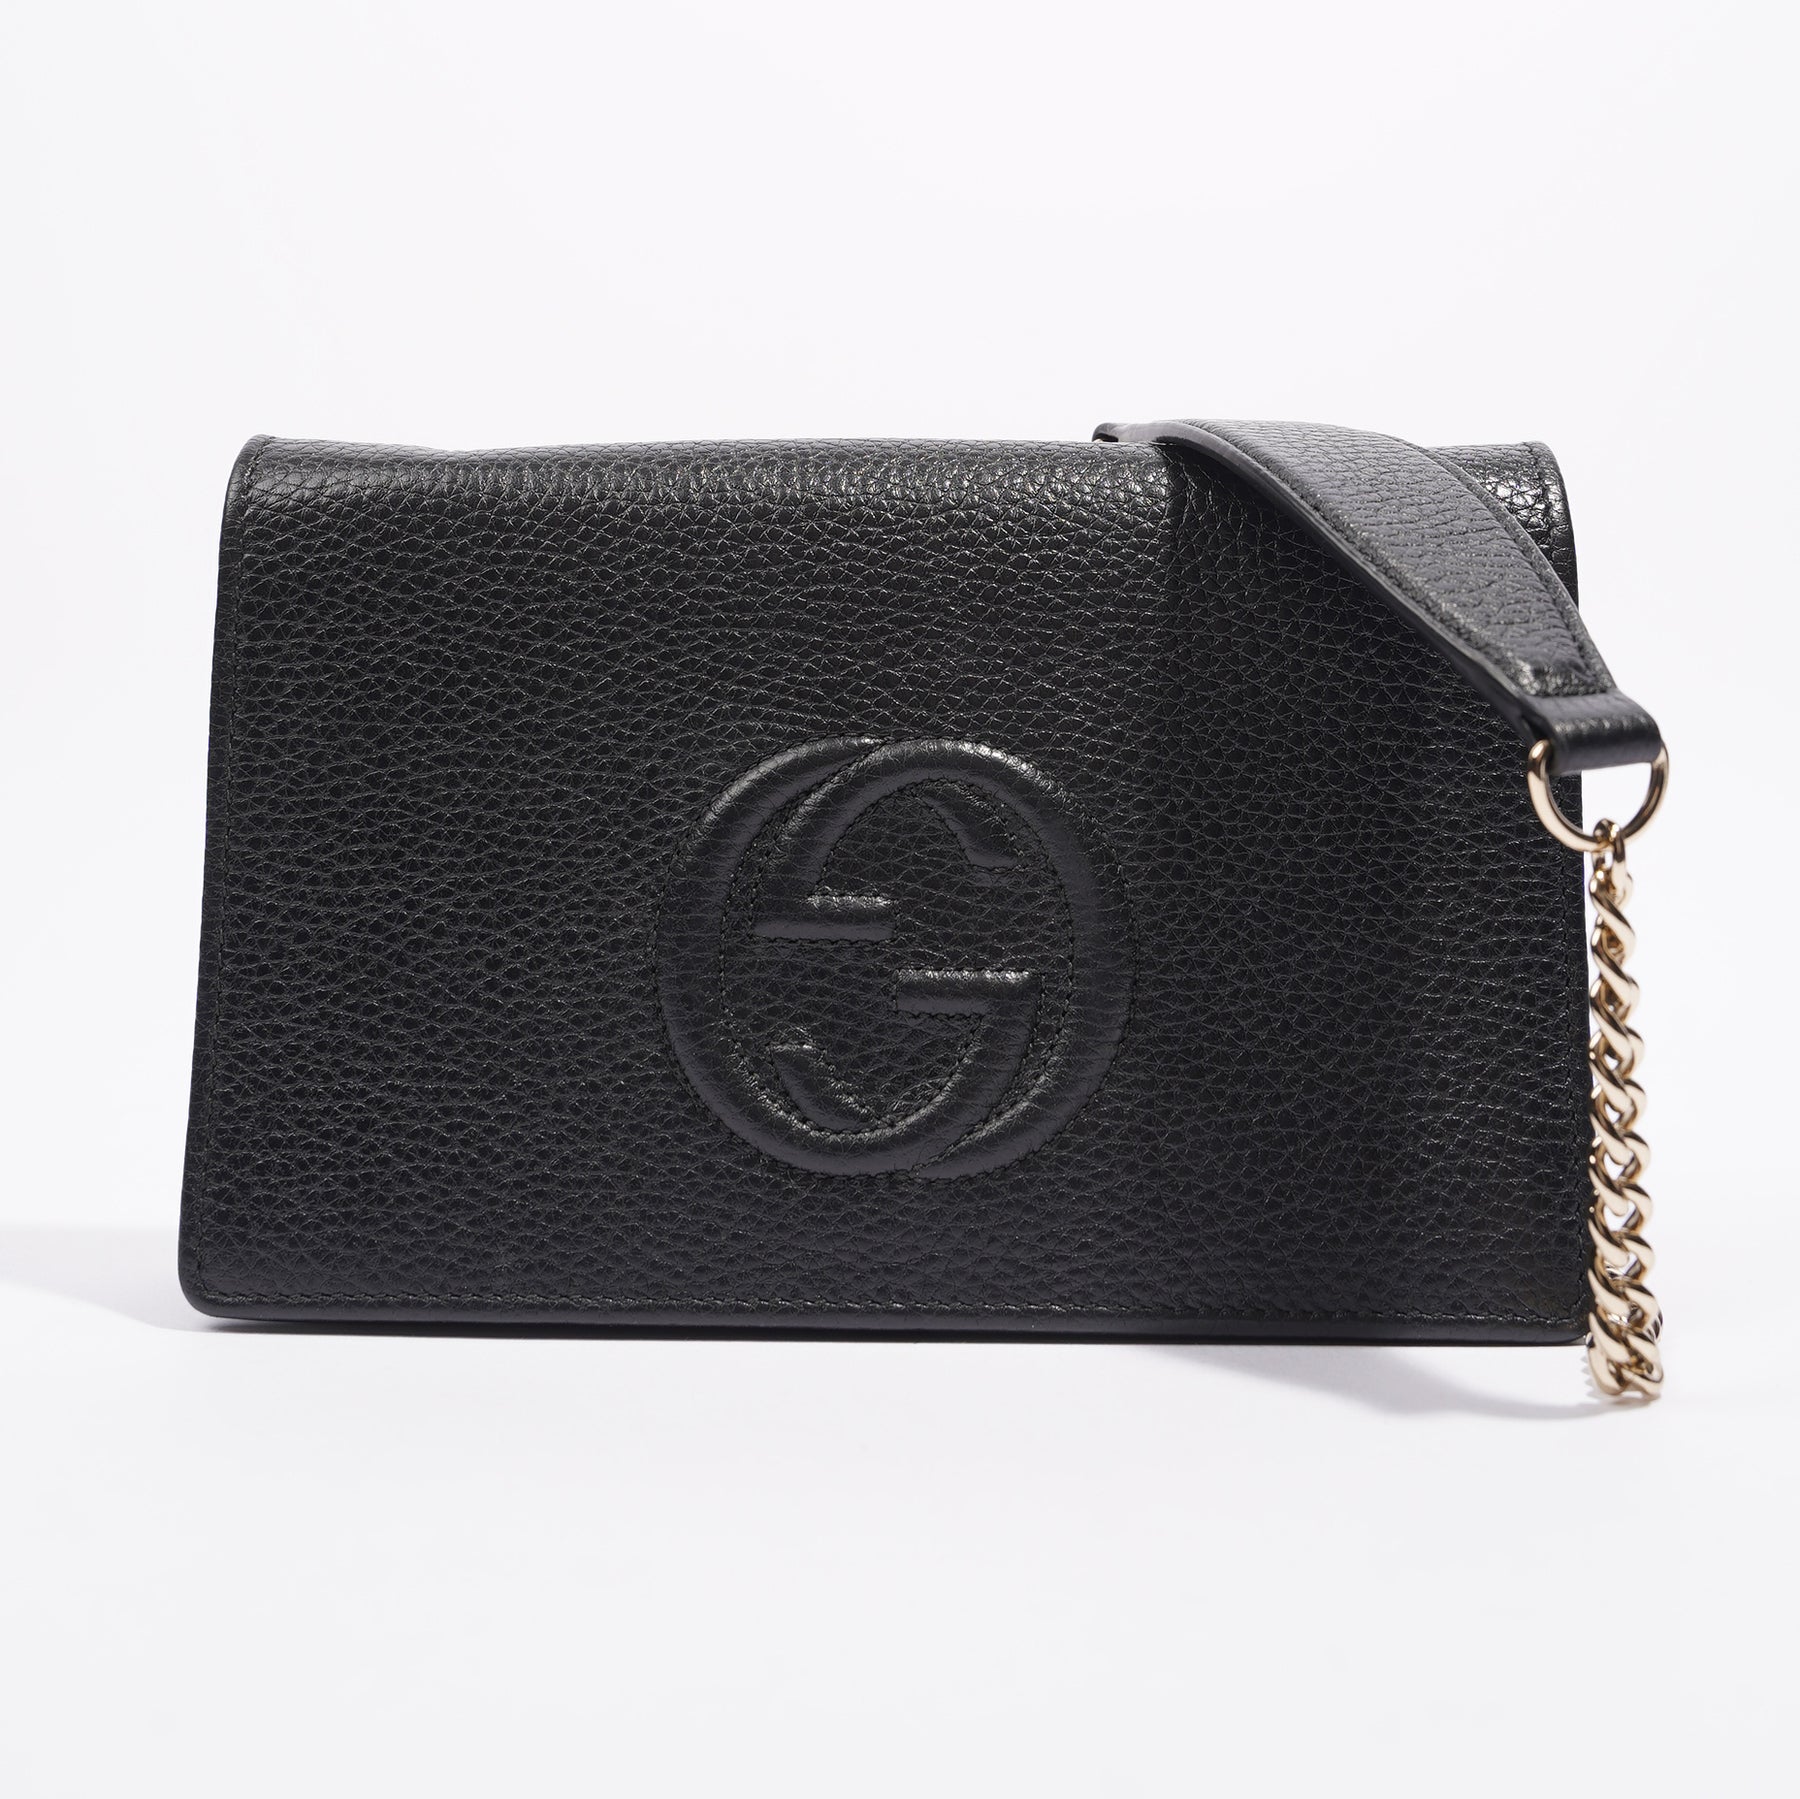 Gucci Compact Wallets for Women | Designer Compact Wallets | GUCCI® US